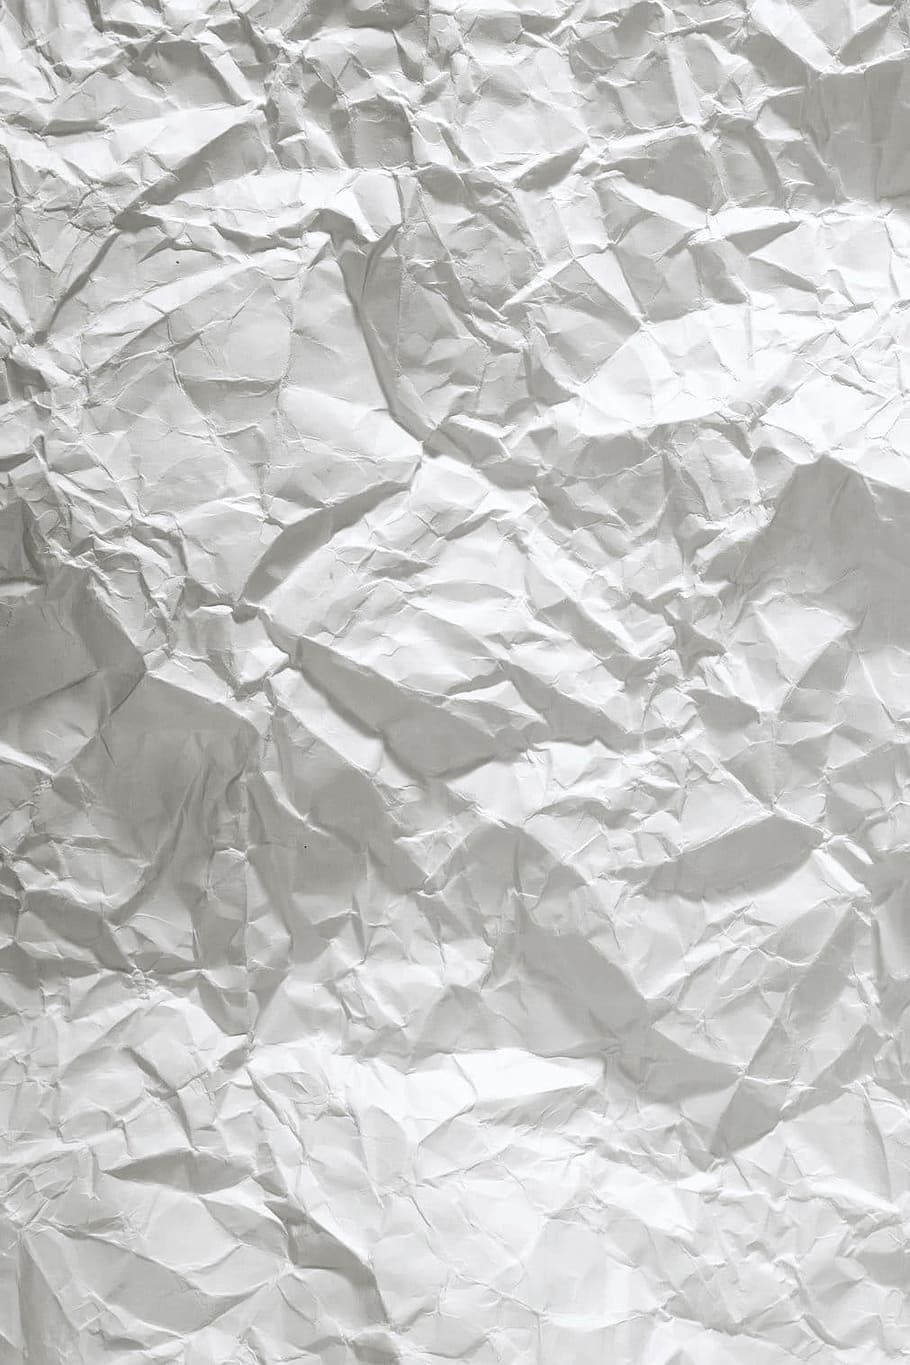 background, crumpled, crushed, garbage, paper, texture, trash, white, wrapping, wrinkled